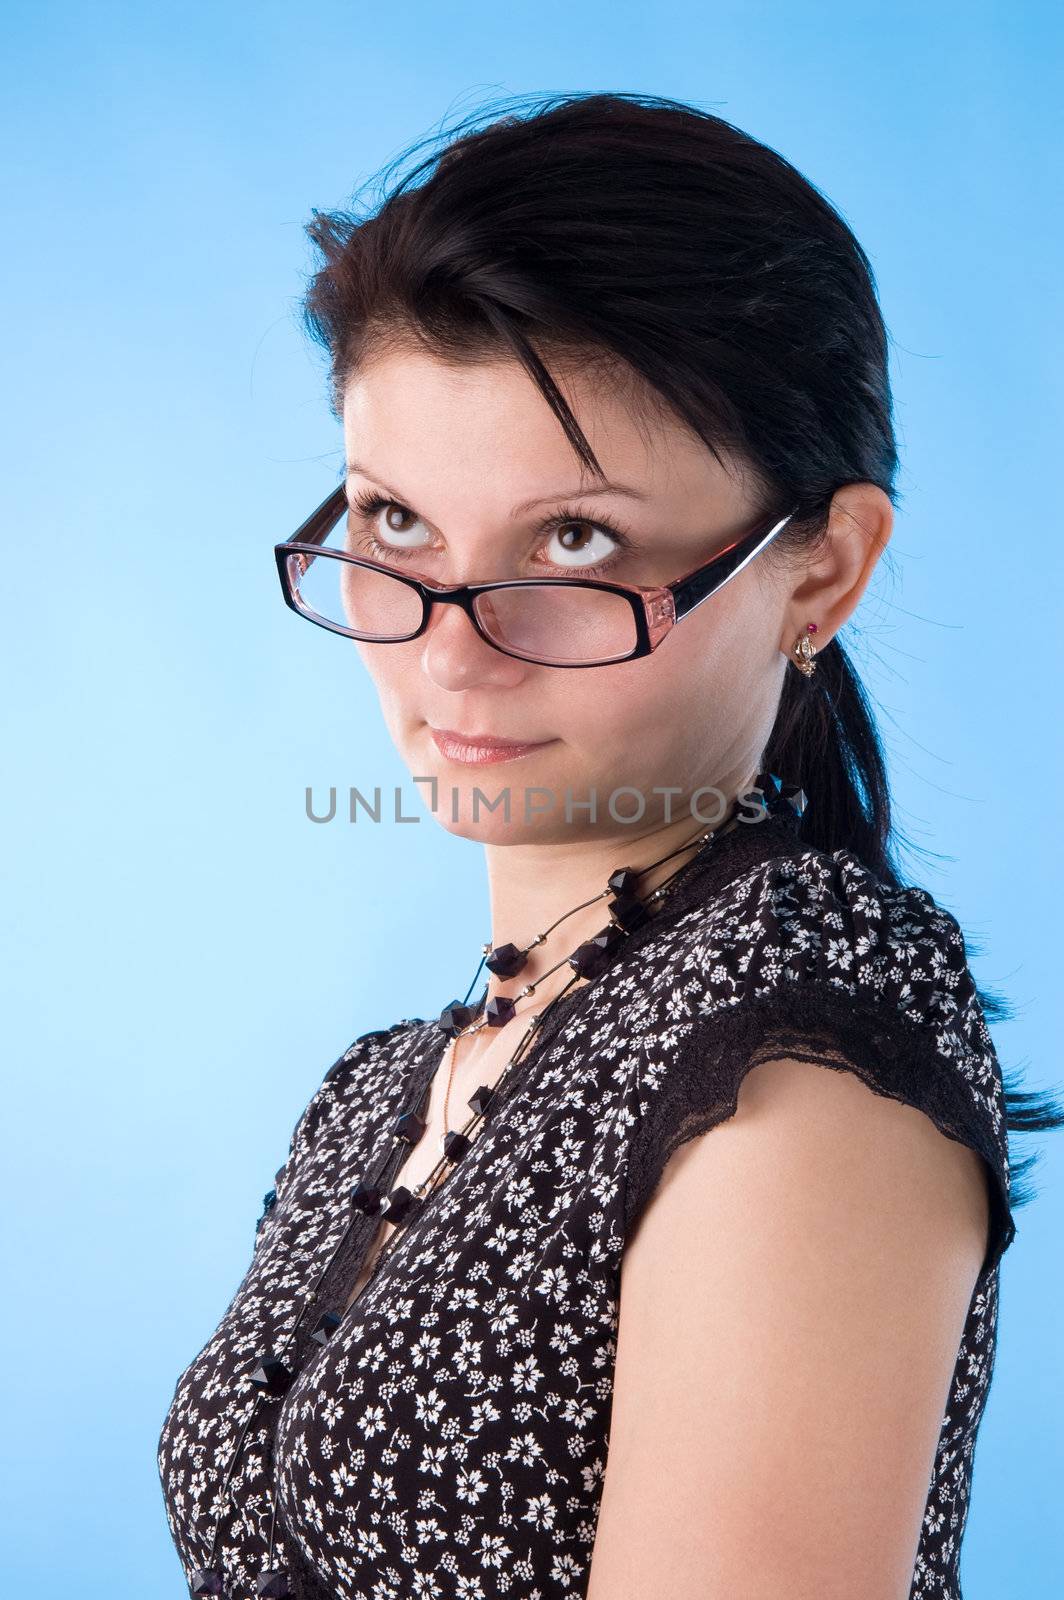 The attractive woman with the glasses, rather like the teacher